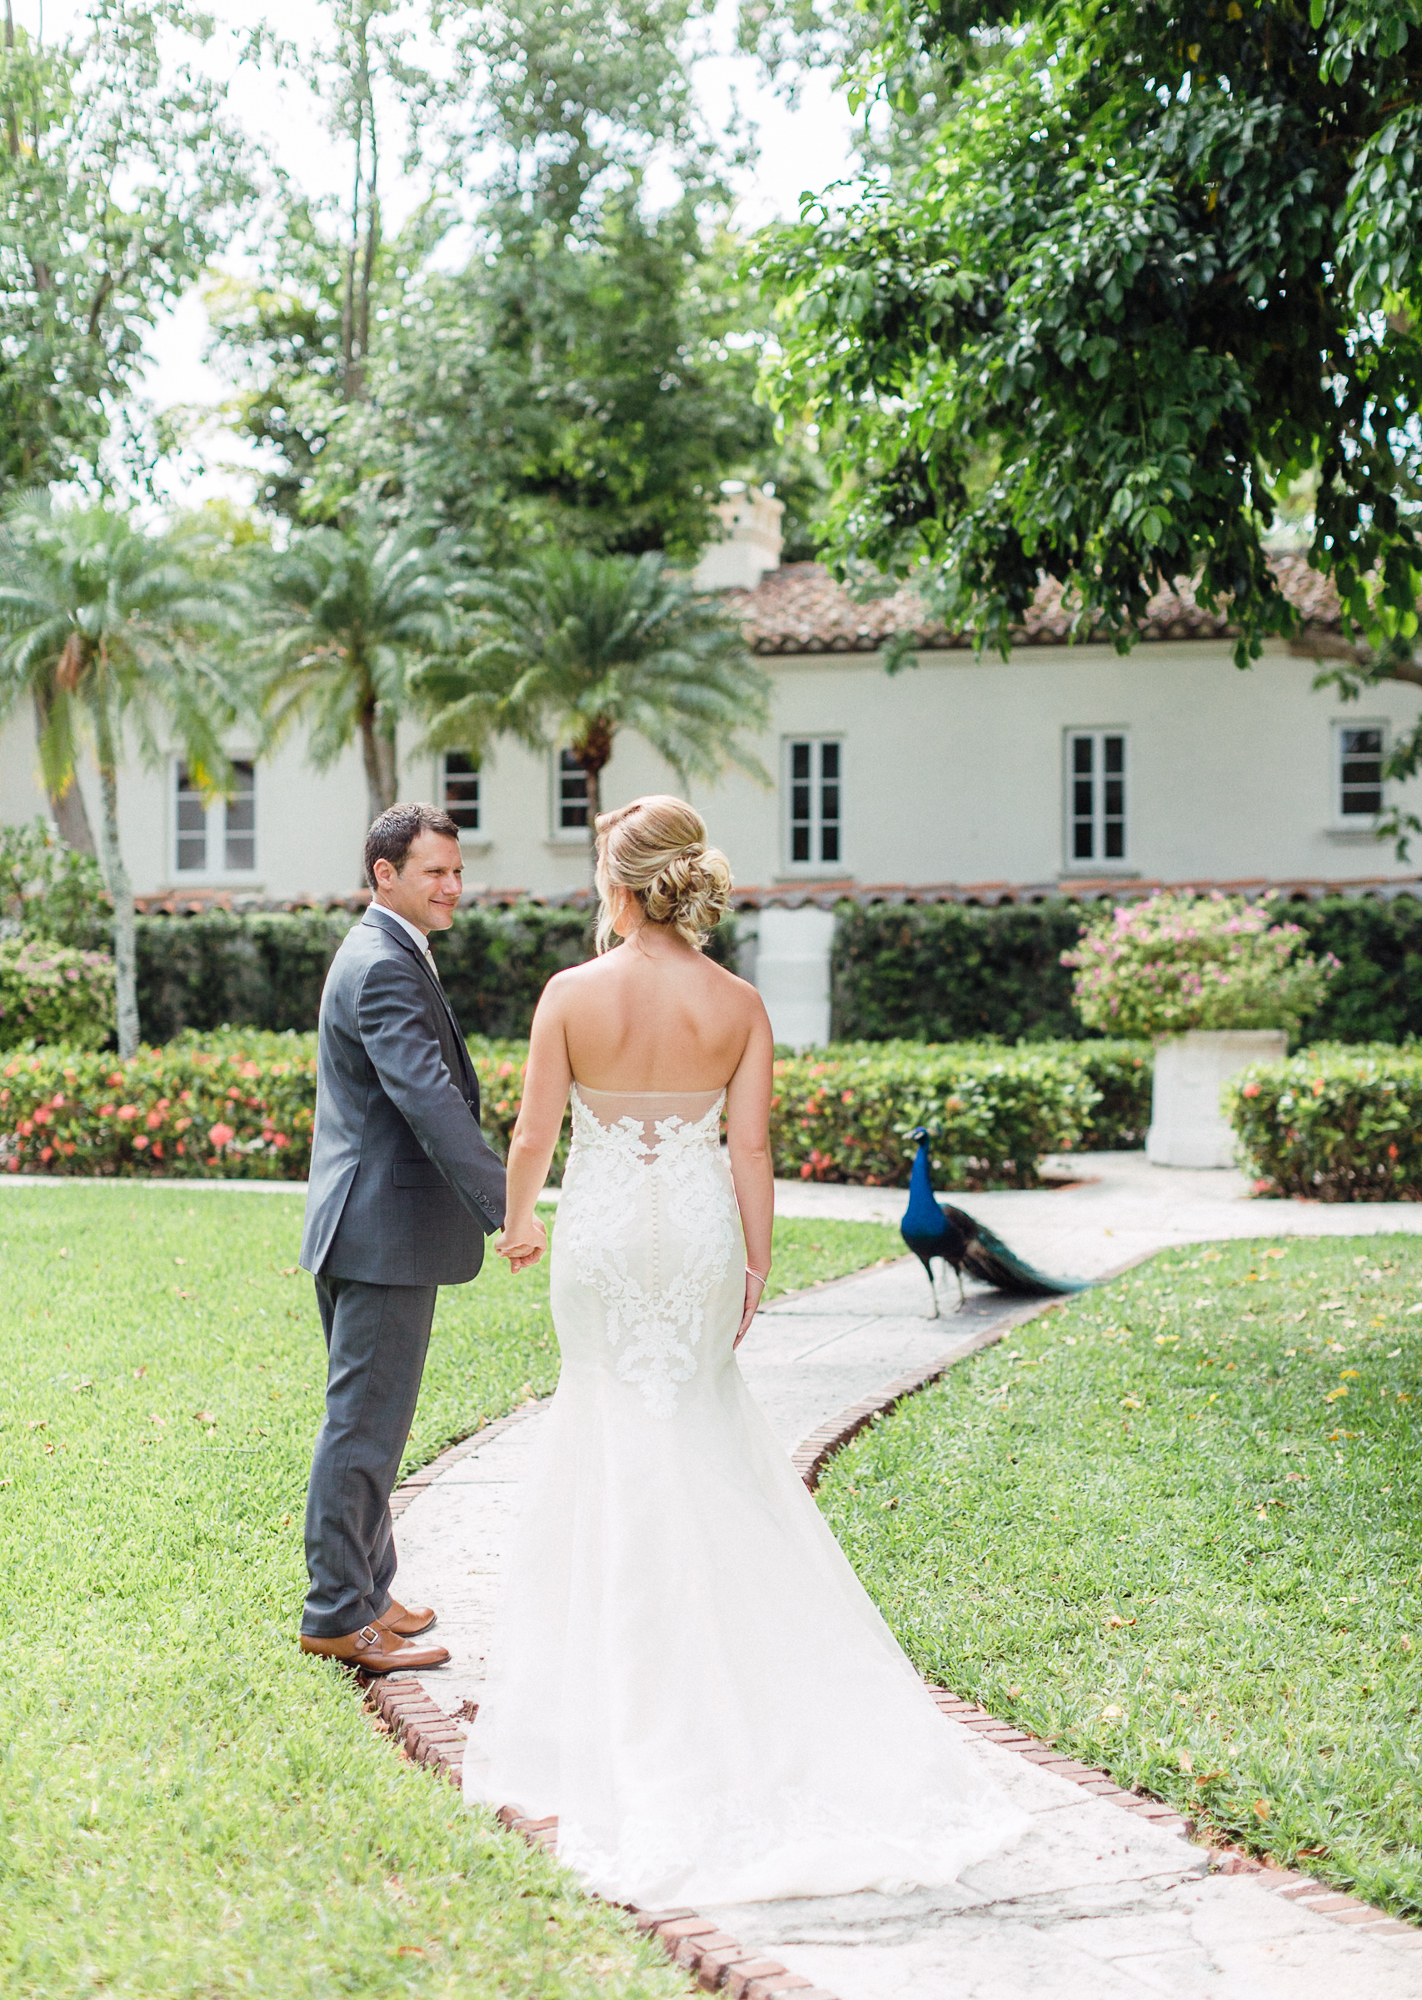 The bride and groom take their wedding photos on fisher island and are greeted by a peacock